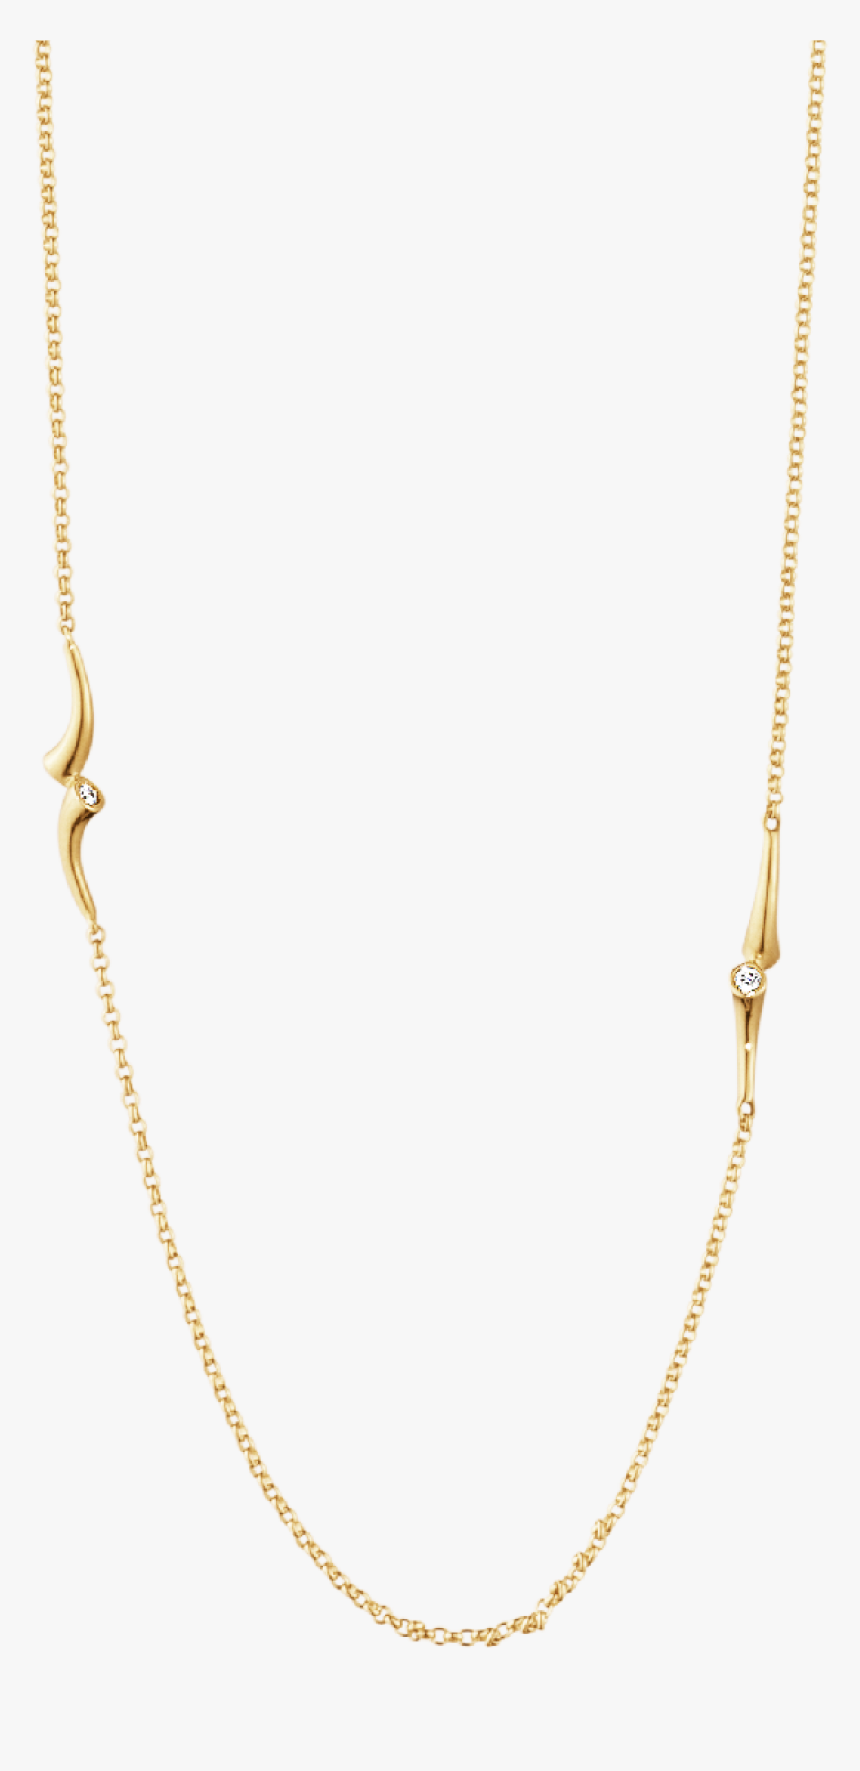 Magic Necklace - Chain, HD Png Download, Free Download